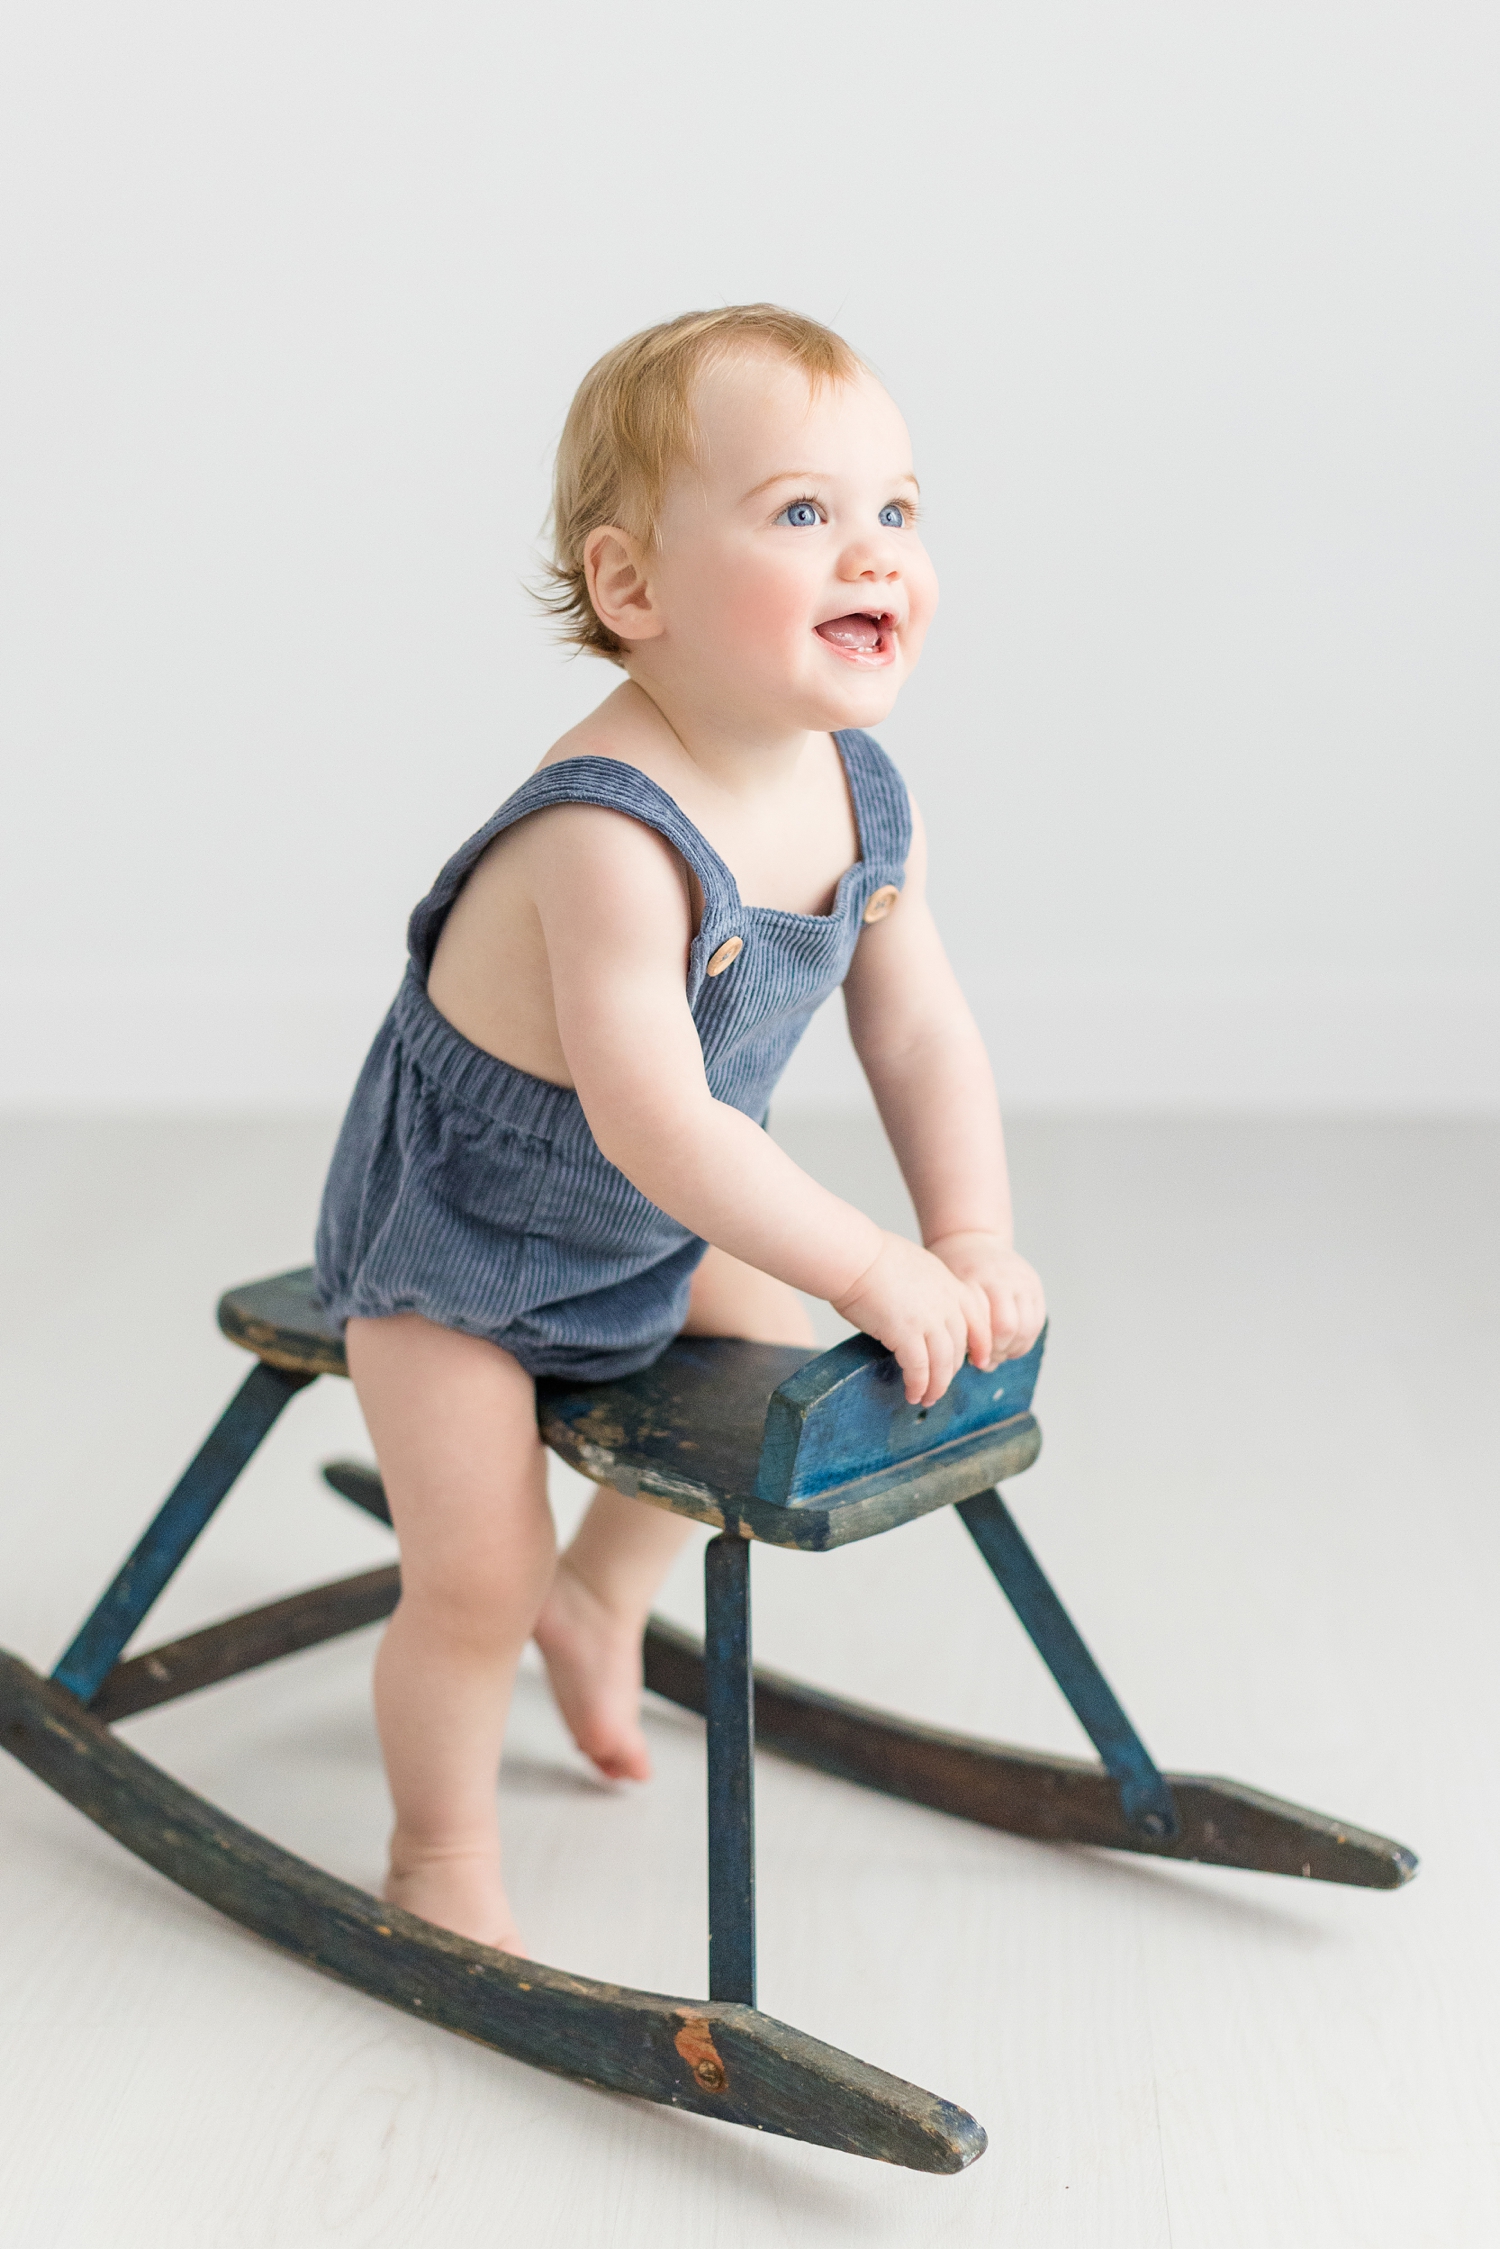 Baby Lewis wearing a blue corduroy romper plays on a blue rocking horse | CB Studio